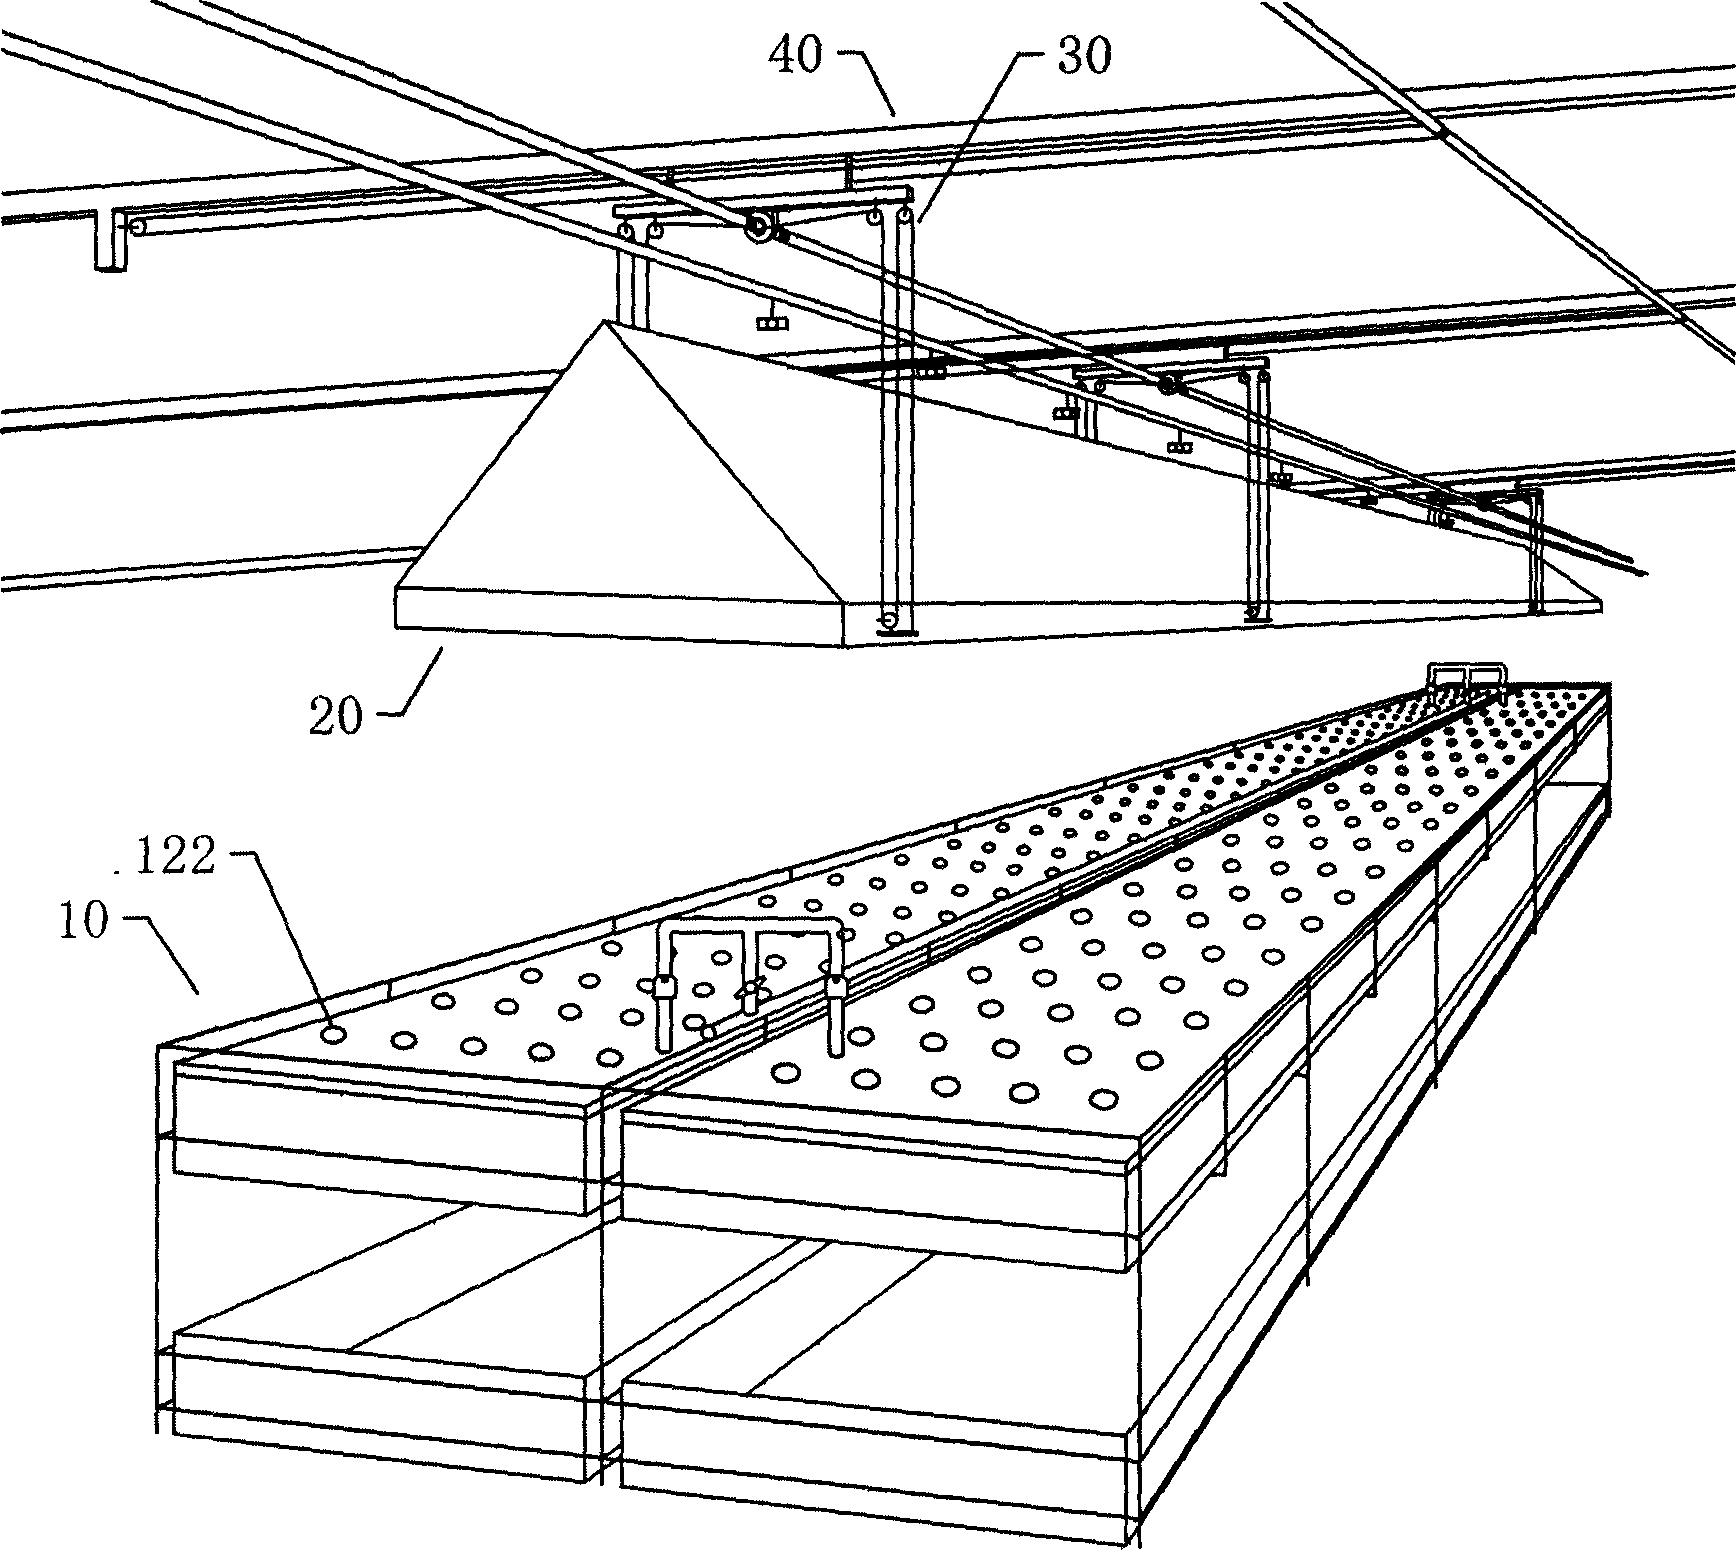 Automated stereoscopic soilless culture system